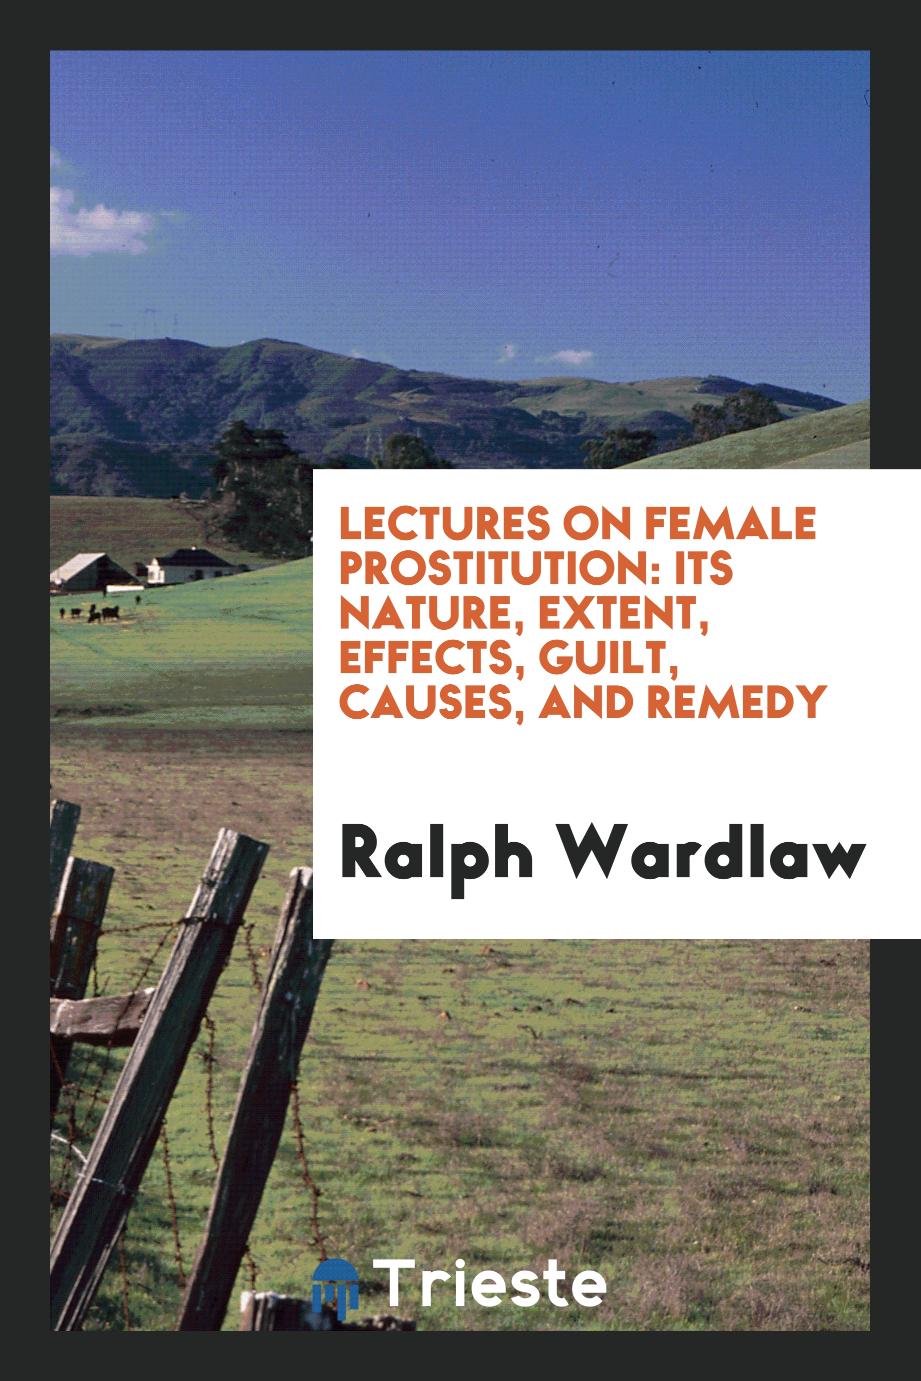 Lectures on Female Prostitution: Its Nature, Extent, Effects, Guilt, Causes, and Remedy